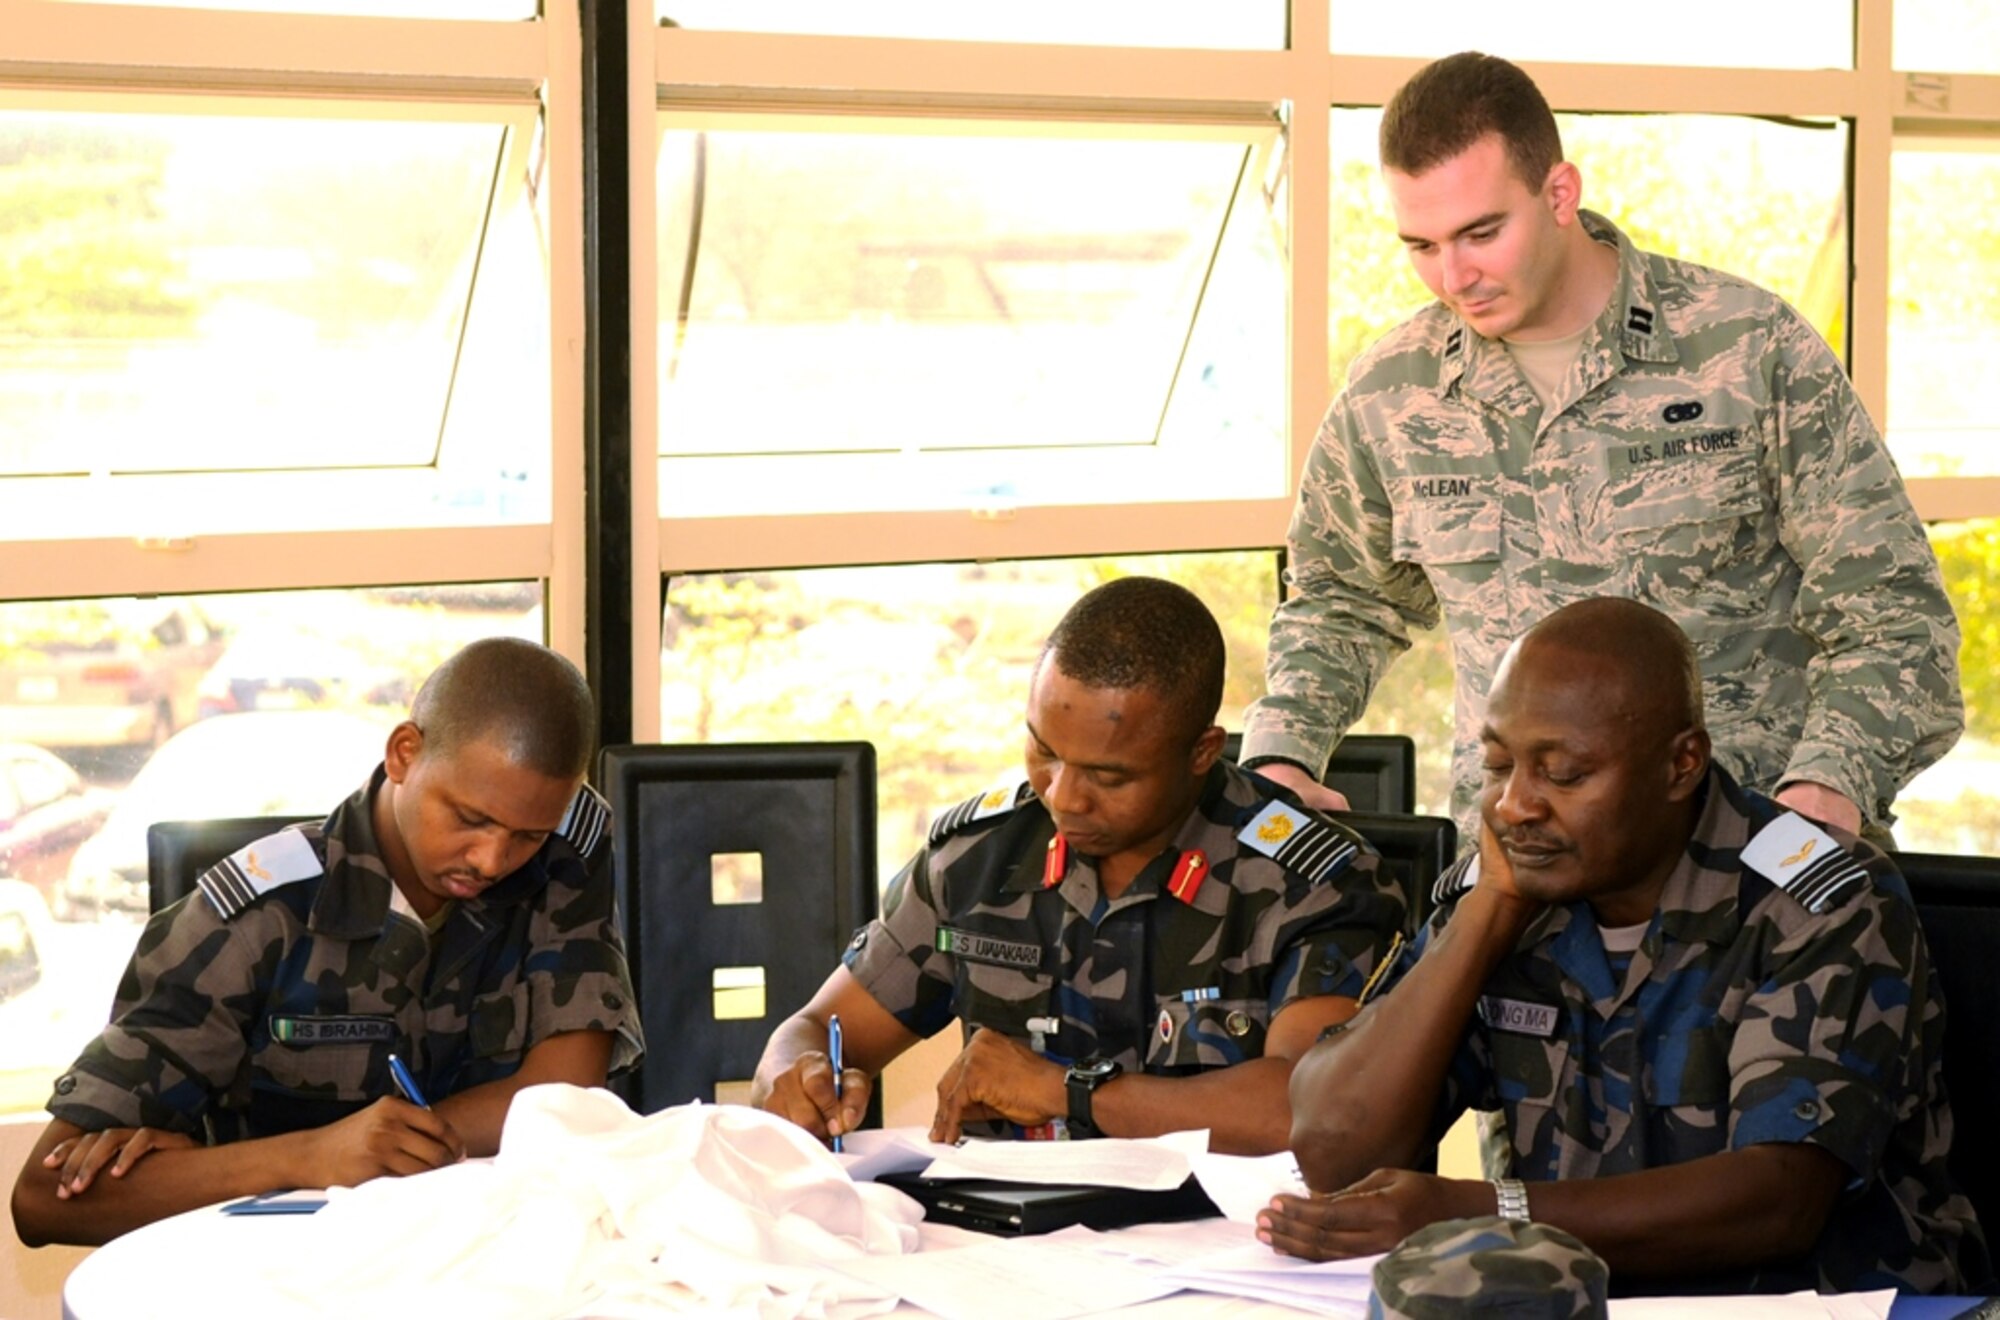 ABUJA, Nigeria – Capt. Vincent McLean, 621st Contingency Response Wing, takes part in a group discussion with members of the Nigerian Air Force for a crisis planning scenario. The Nigerian air force hosted a disaster relief planning seminar in partnership with the 621st CRW, U.S. Air Forces in Europe-Air Forces Africa, and U.S. Africa Command at the National Defense College in Abuja, Nigeria, 27-30 Jan. (Photo by U.S. Air Force Capt. Sybil Taunton/Released)